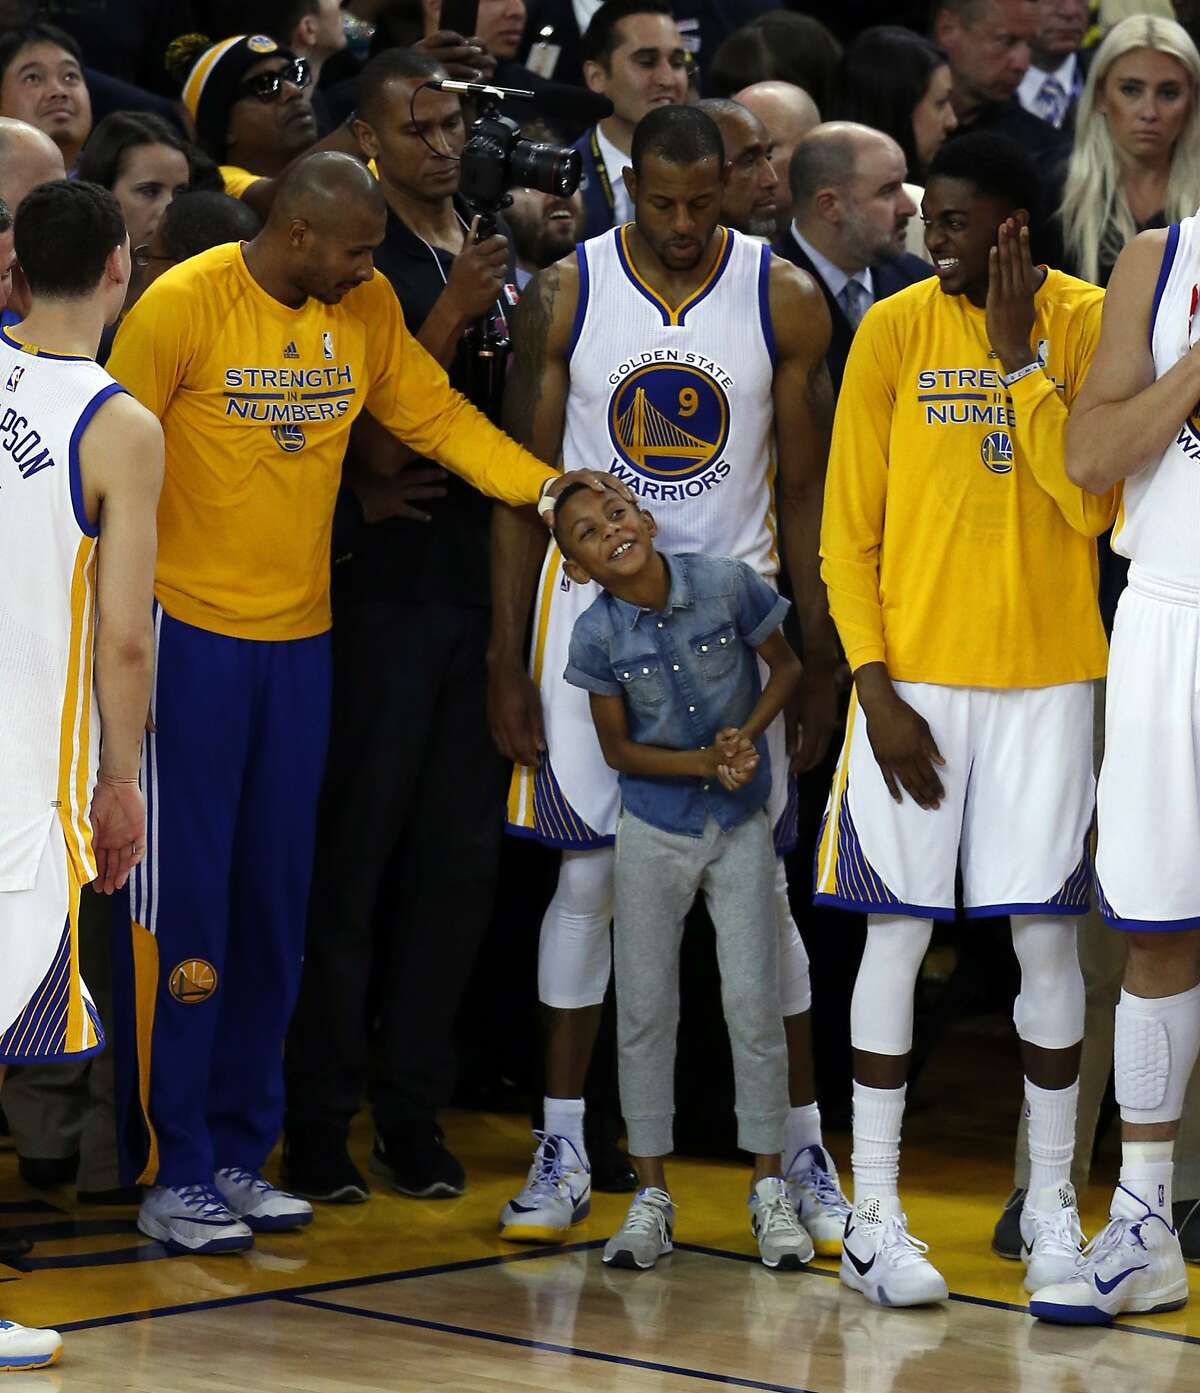 Andre Iguodala's son cried when told father might leave Warriors